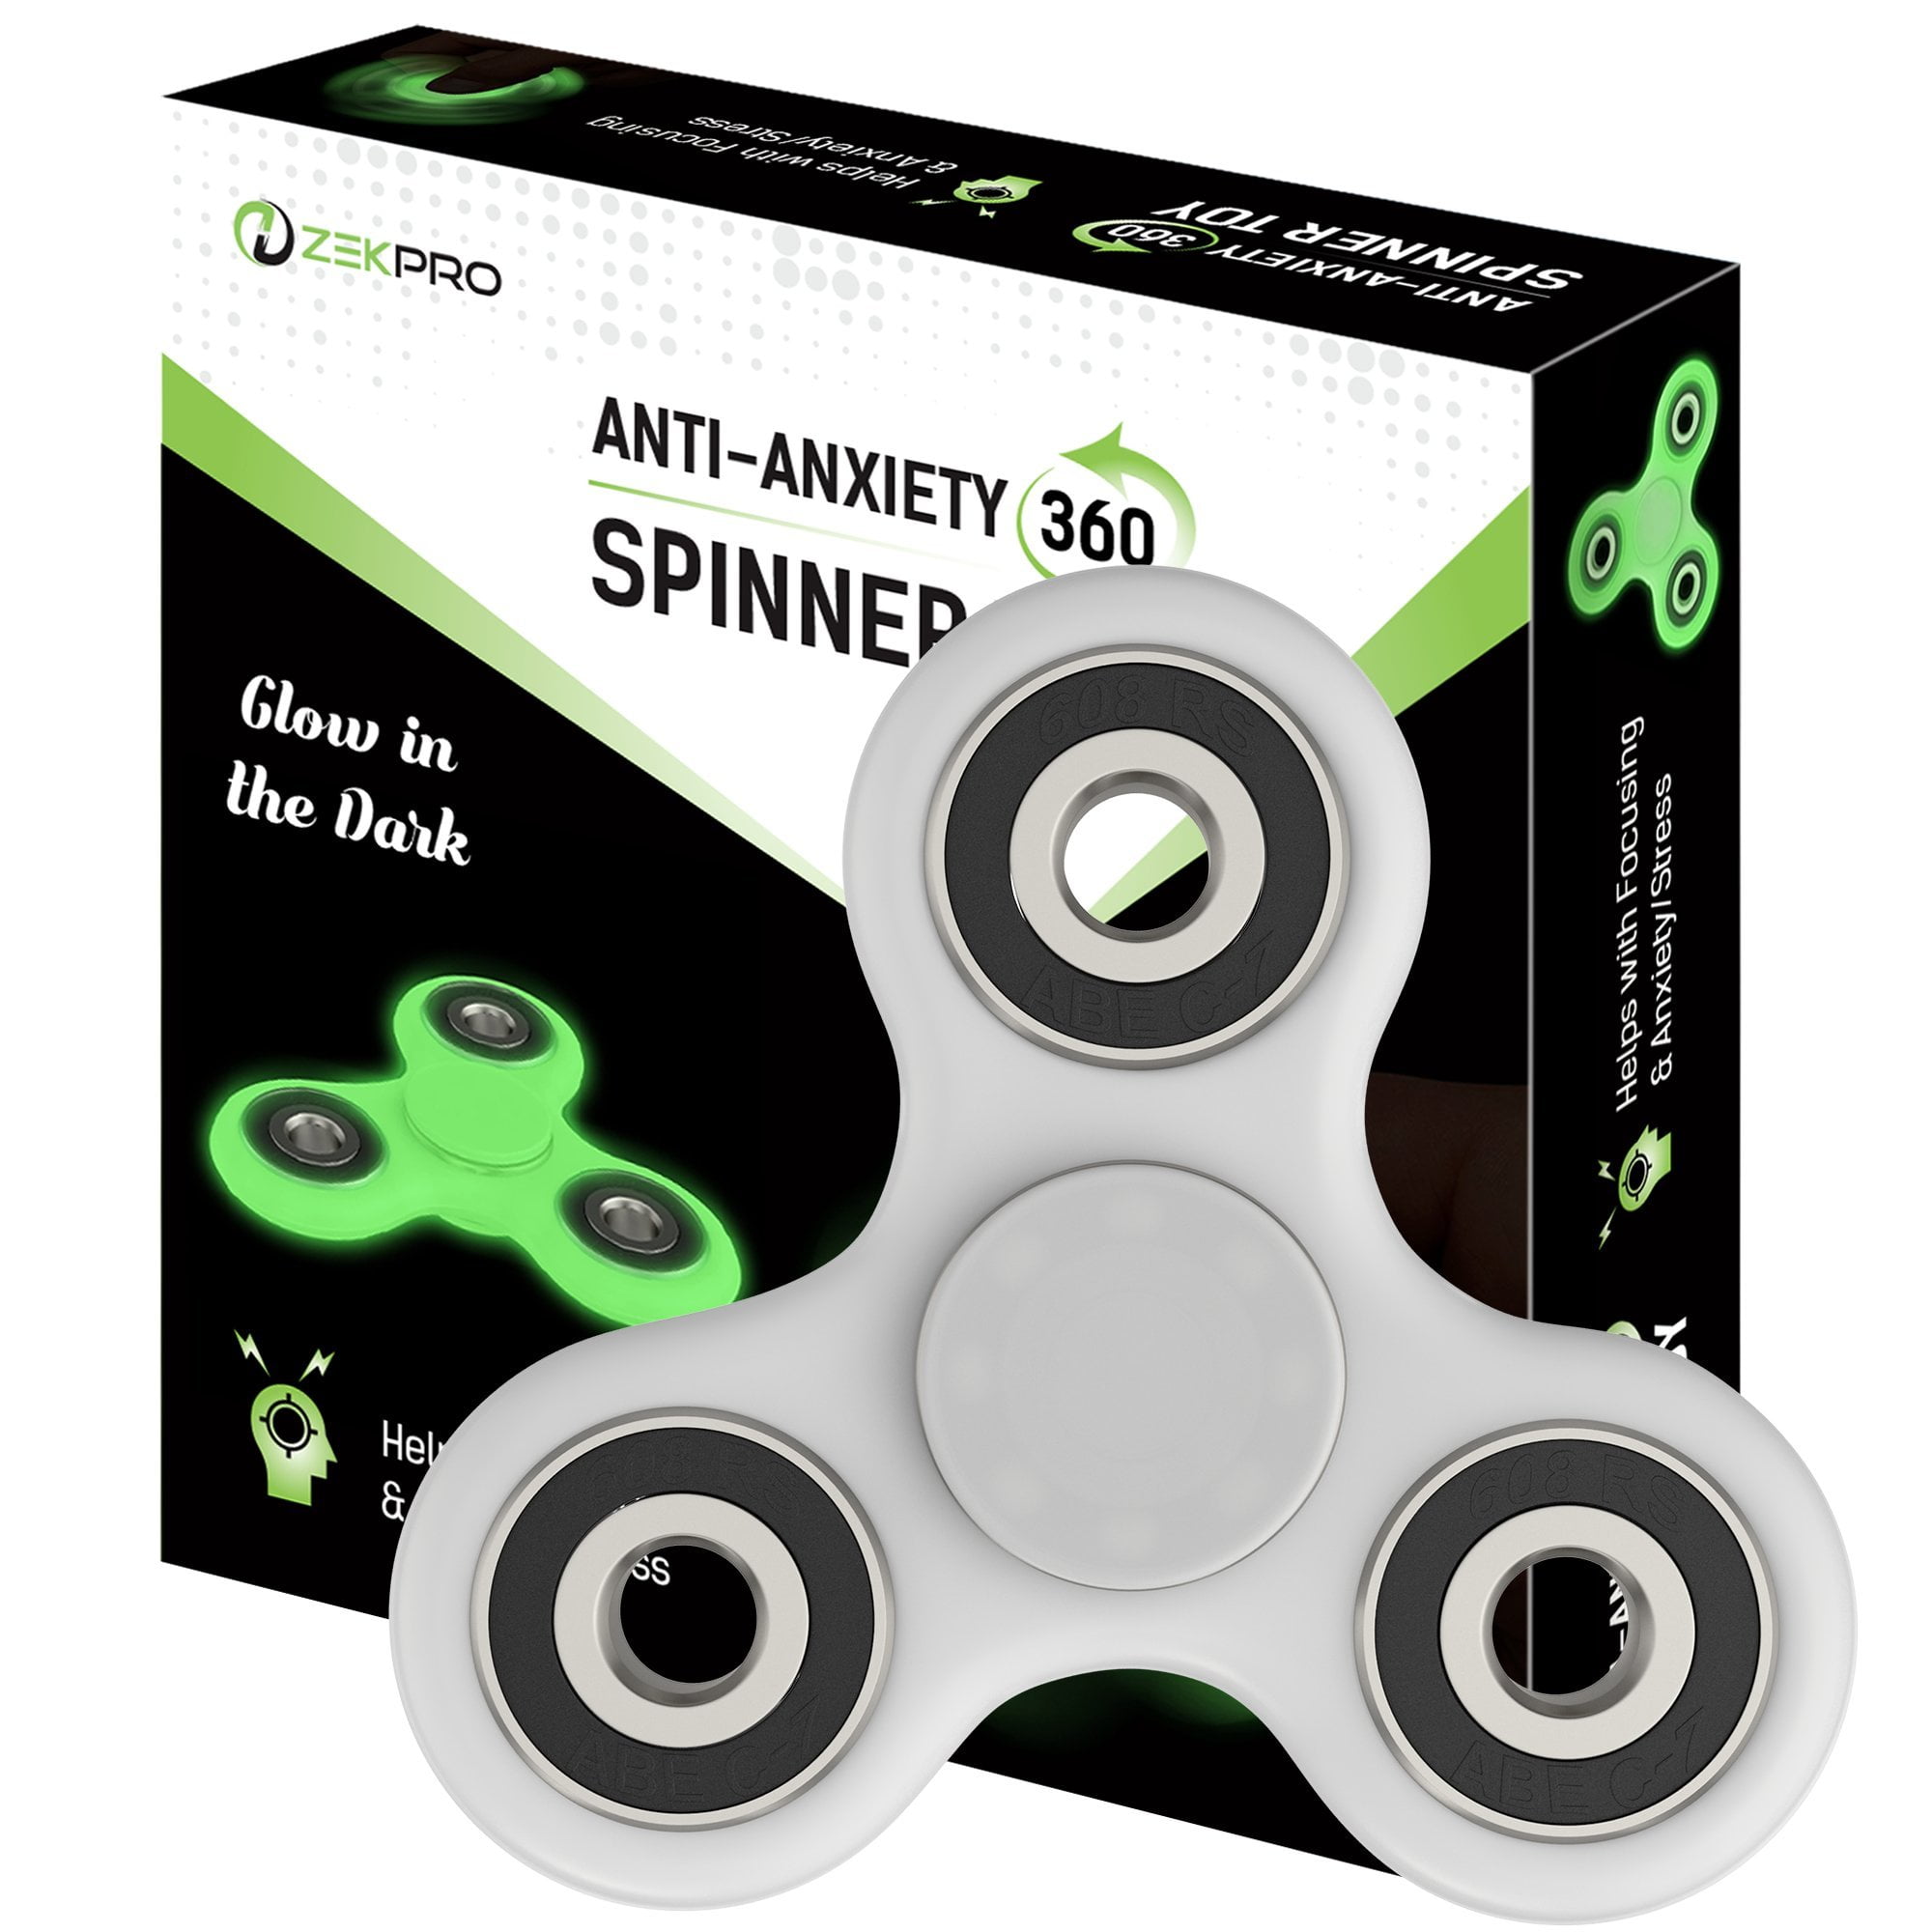 Metal Double layer Fidget Spinner Anti anxiety toy For stress relief ADHD Gift 